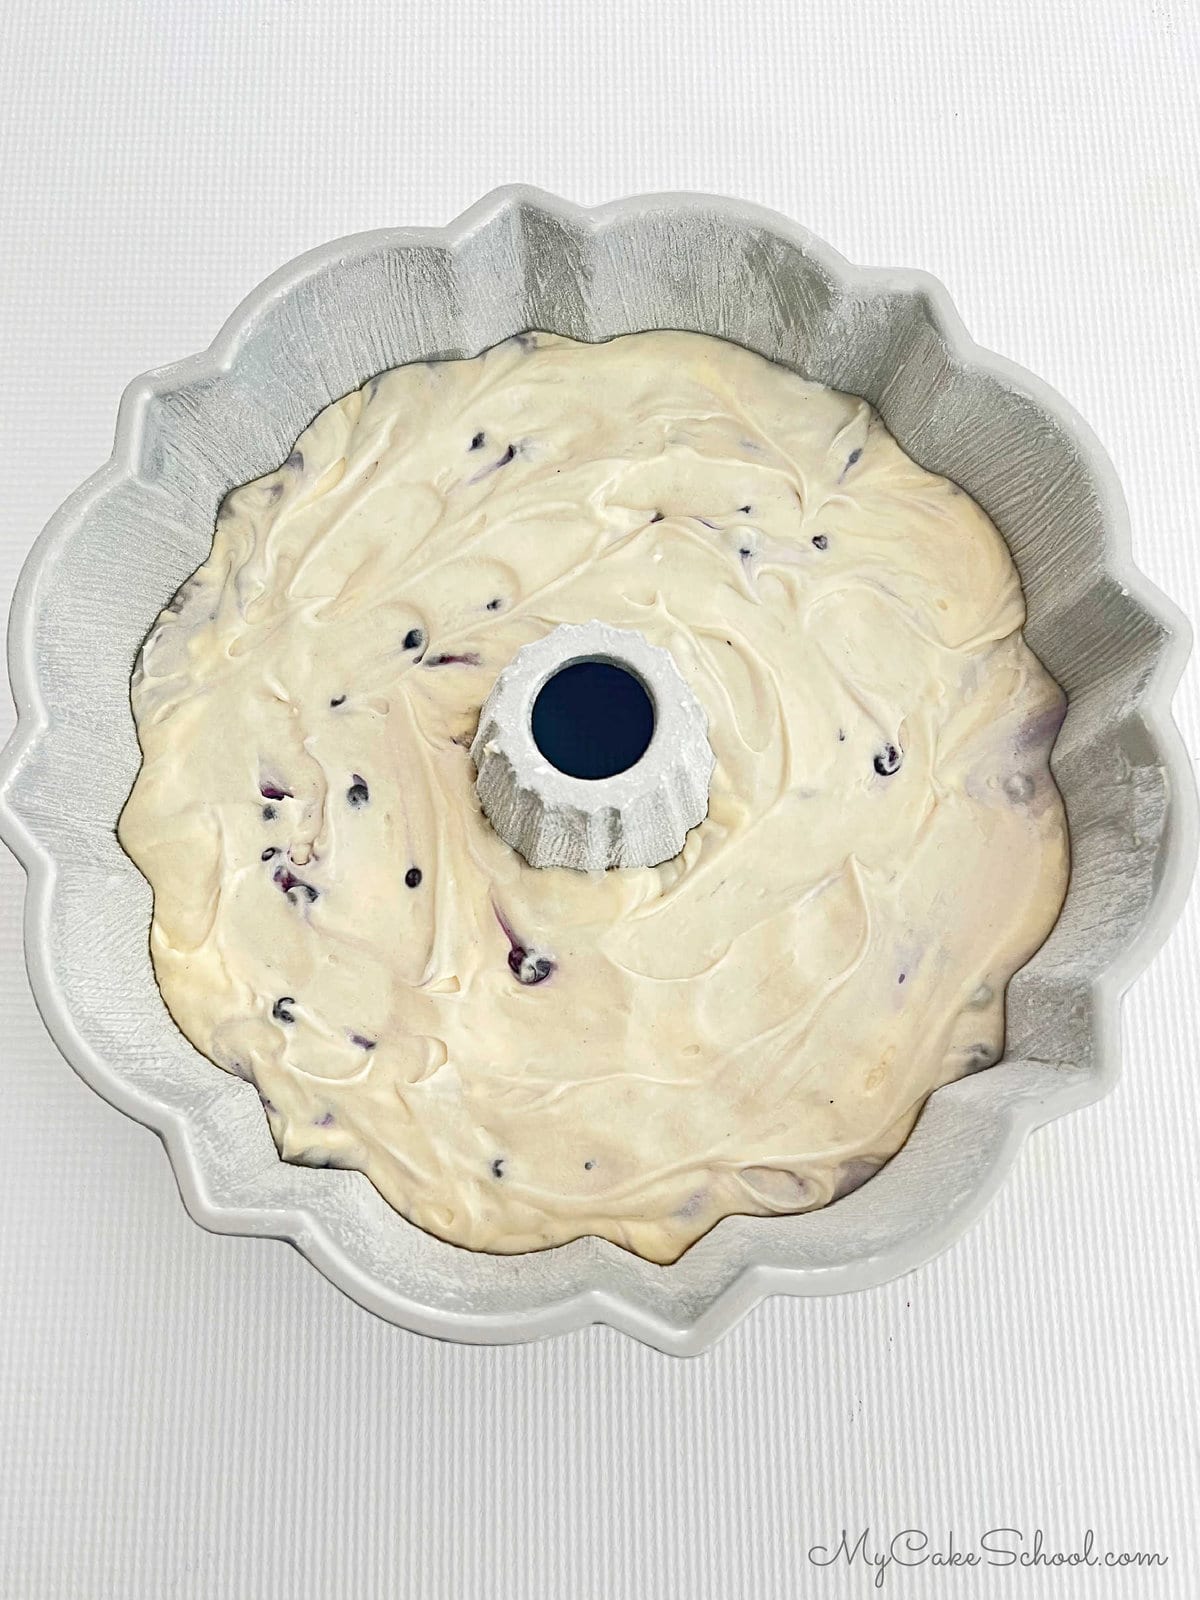 Filled Blueberry Bunt Cake pan. The pan is layered with blueberry cake batter, a cinnamon mixture, and another layer of blueberry cake batter.